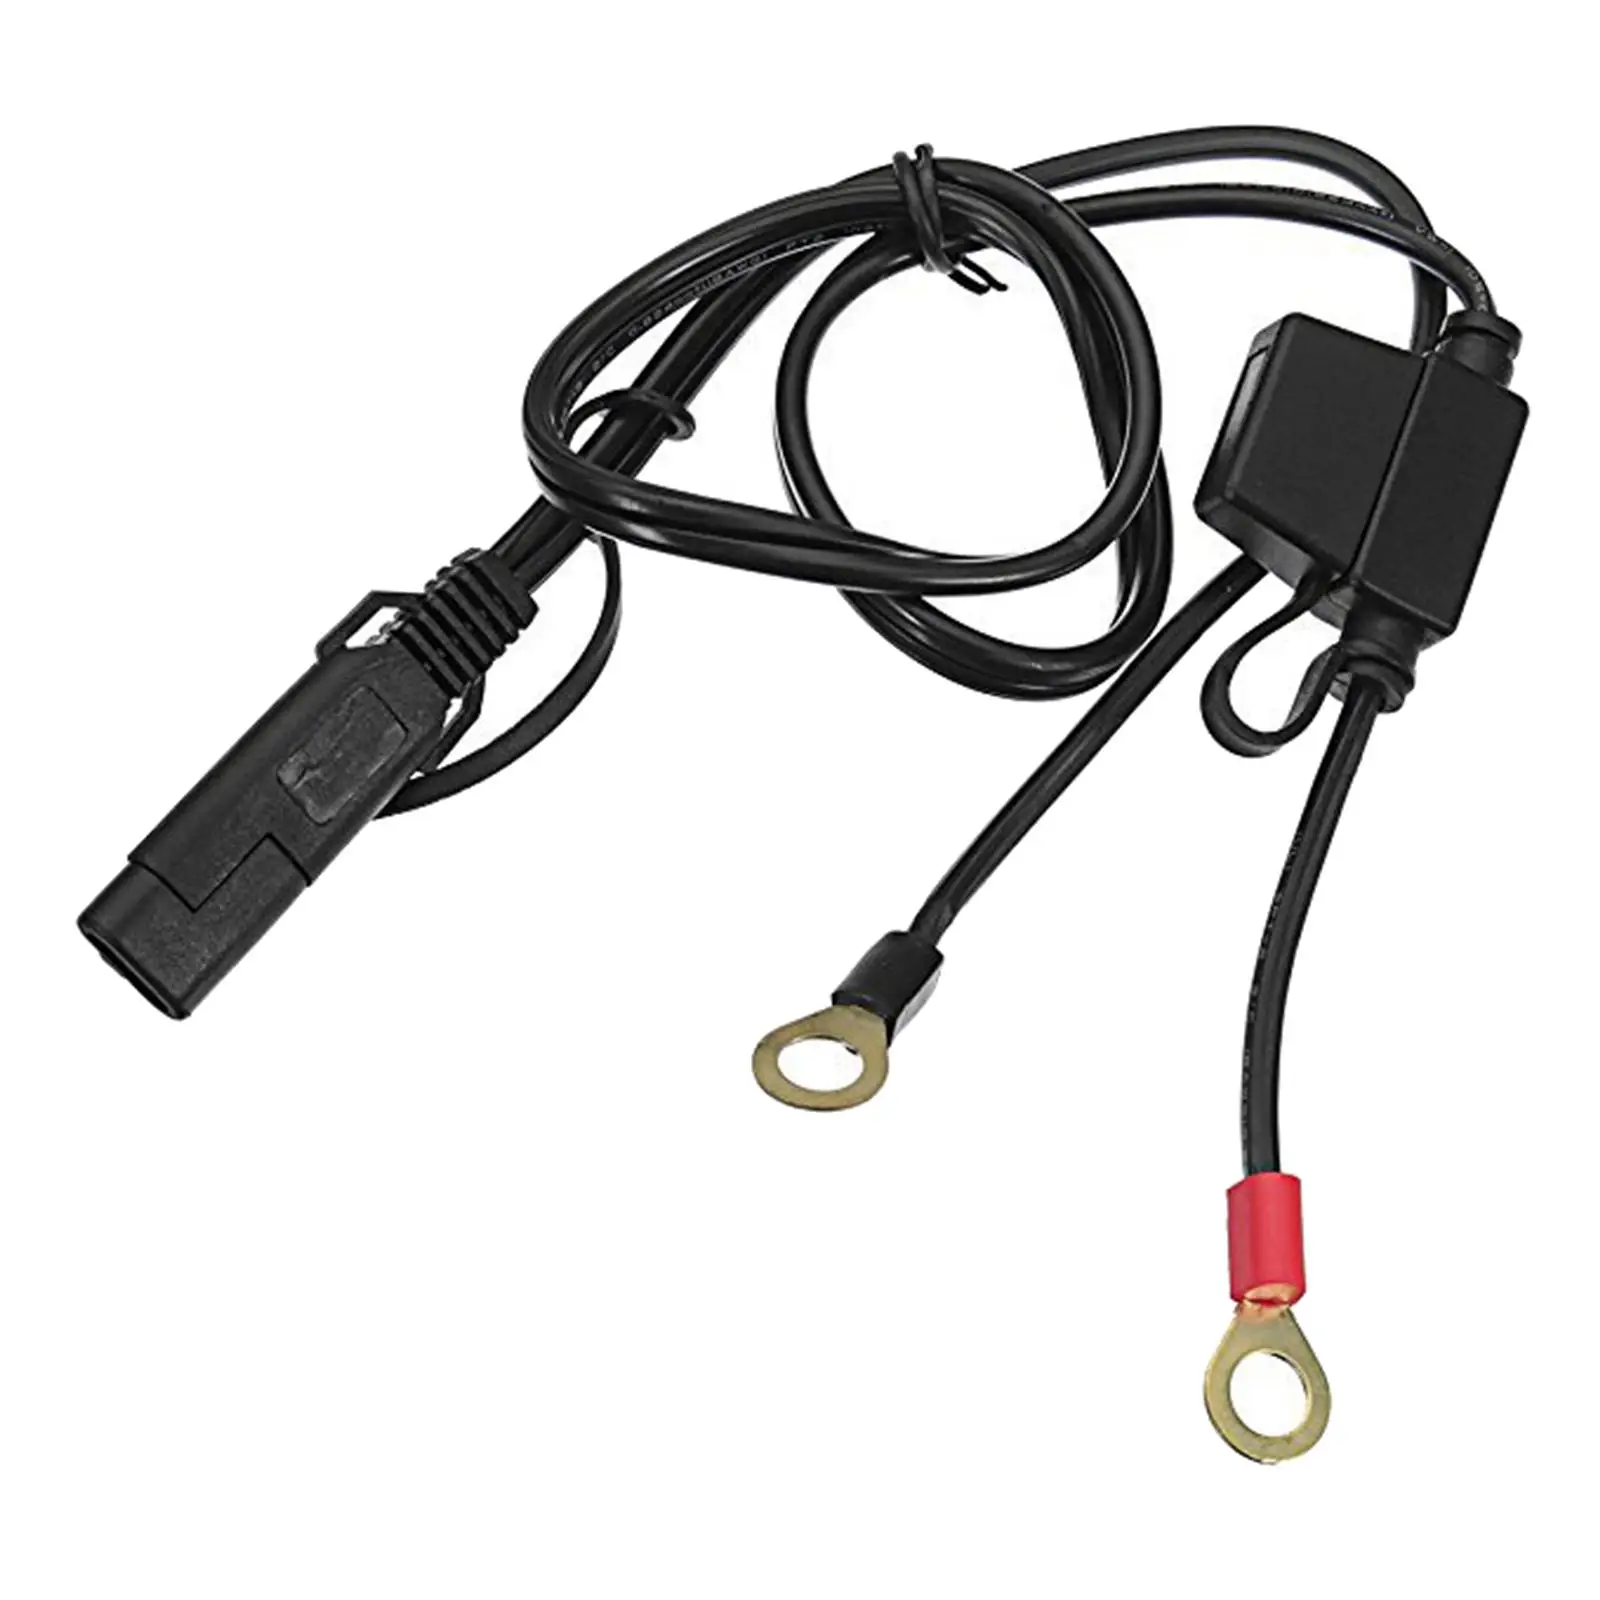 SAE Quick Disconnect Cable Fit for Motorcycle Battery Terminal Tractor Car